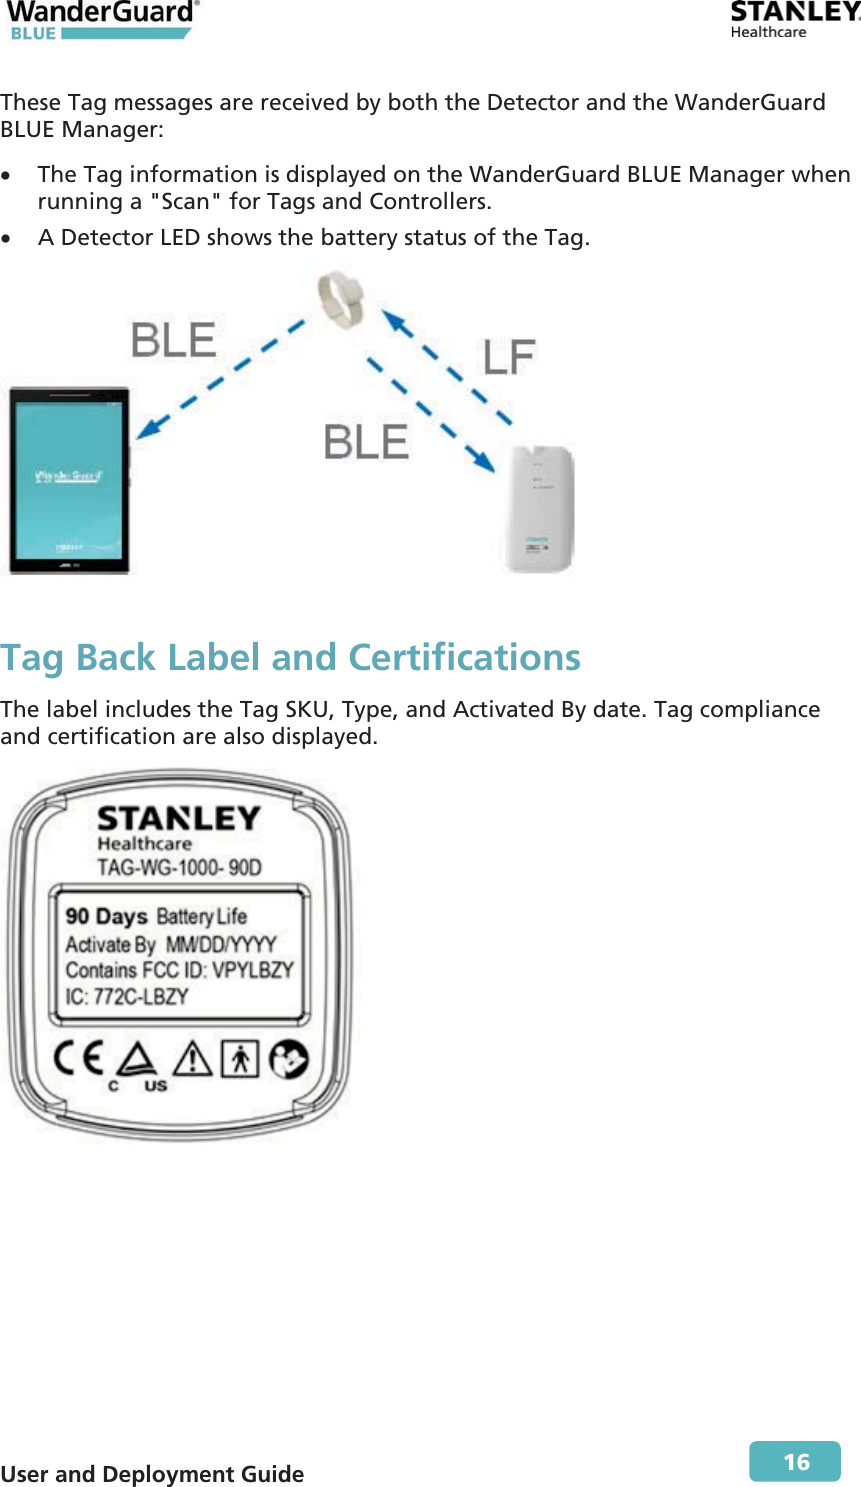  User and Deployment Guide        16 These Tag messages are received by both the Detector and the WanderGuard BLUE Manager: x The Tag information is displayed on the WanderGuard BLUE Manager when running a &quot;Scan&quot; for Tags and Controllers. x A Detector LED shows the battery status of the Tag.  Tag Back Label and Certifications The label includes the Tag SKU, Type, and Activated By date. Tag compliance and certification are also displayed.   